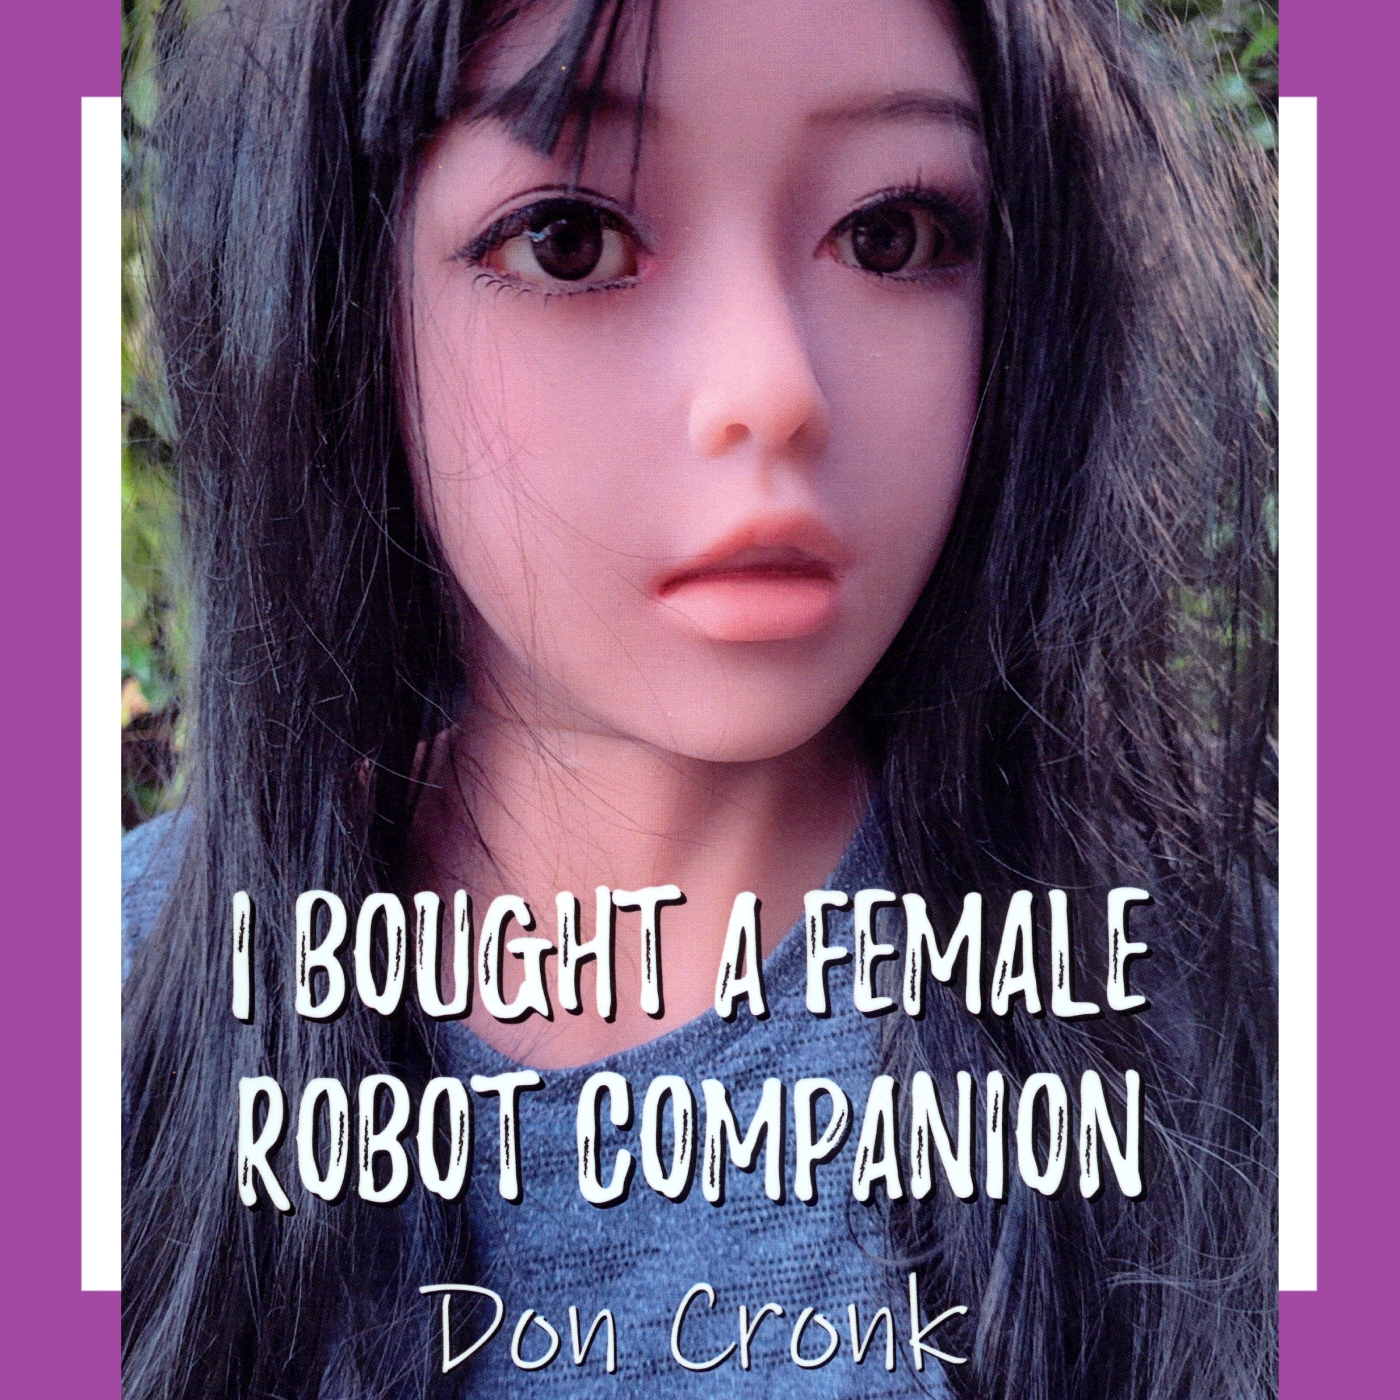 image for I bought a female robot companion